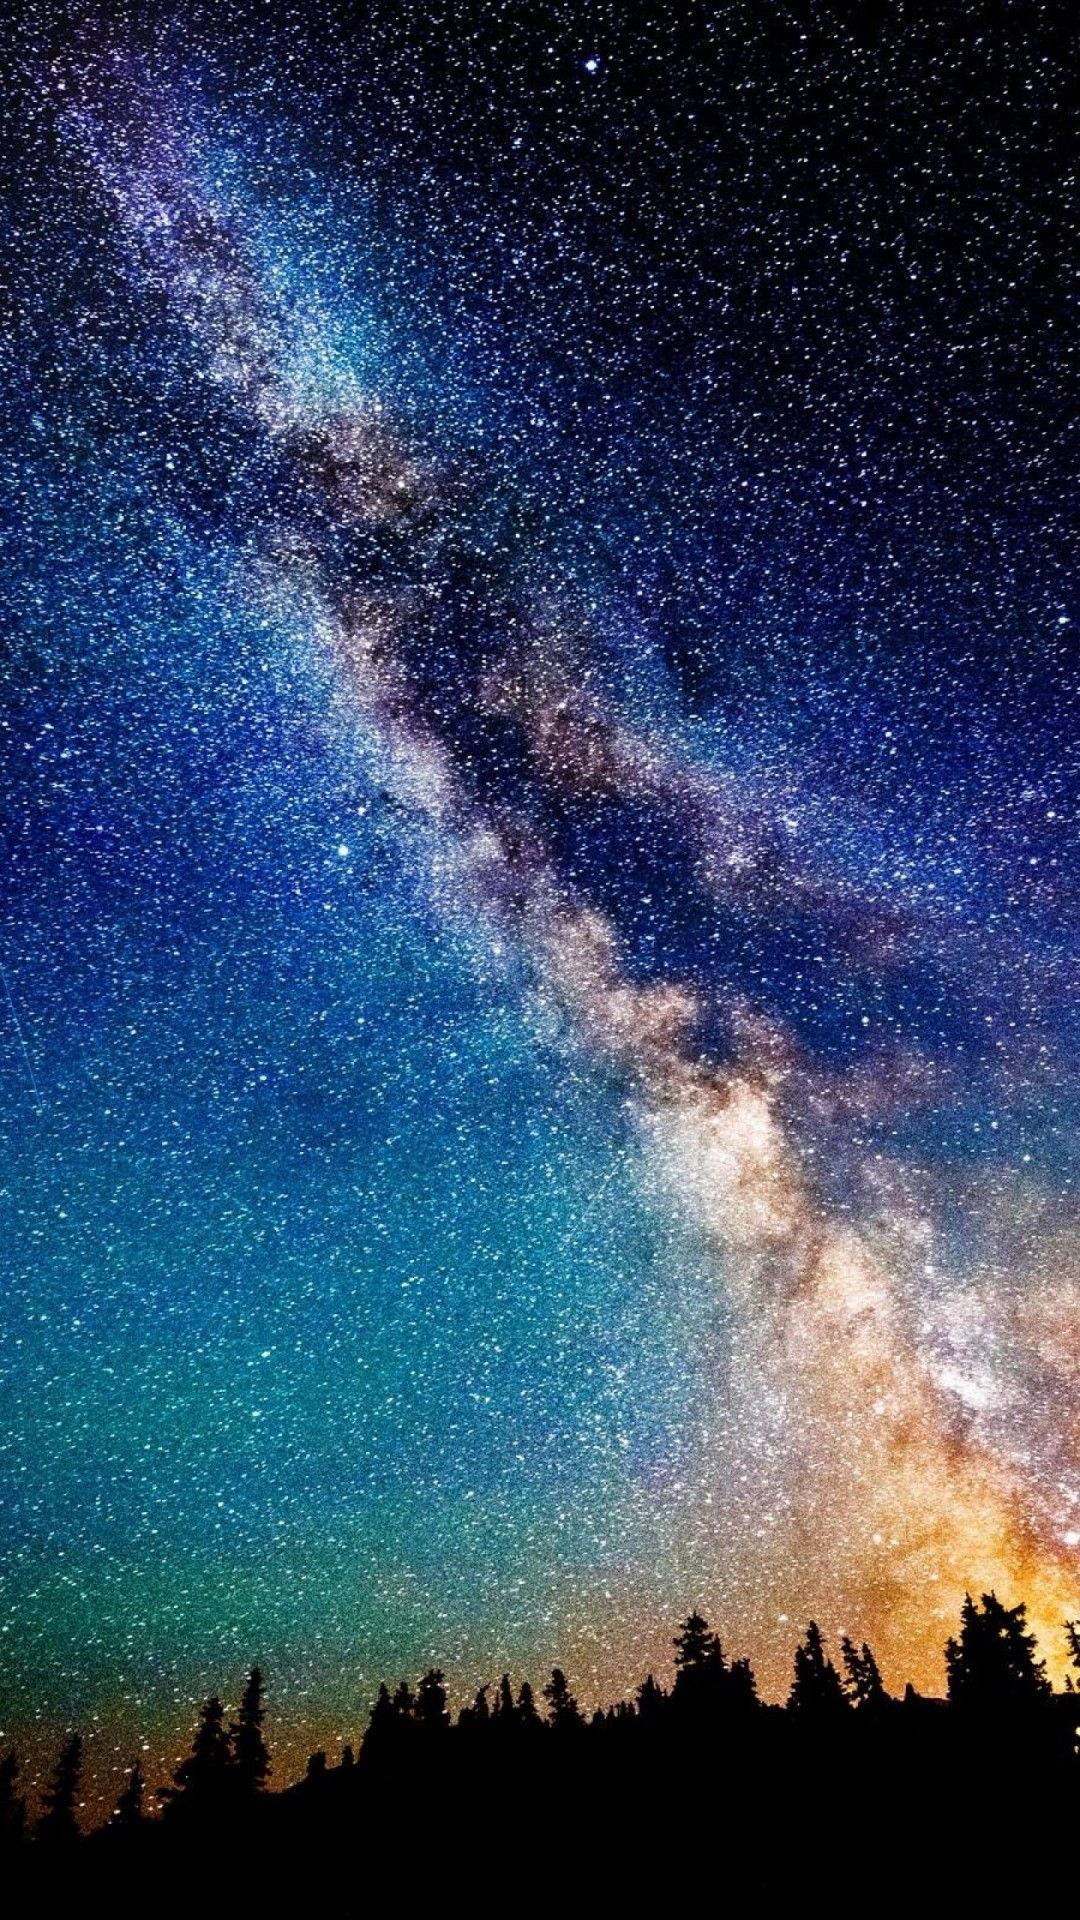 Space HD Wallpaper for iPhone 7